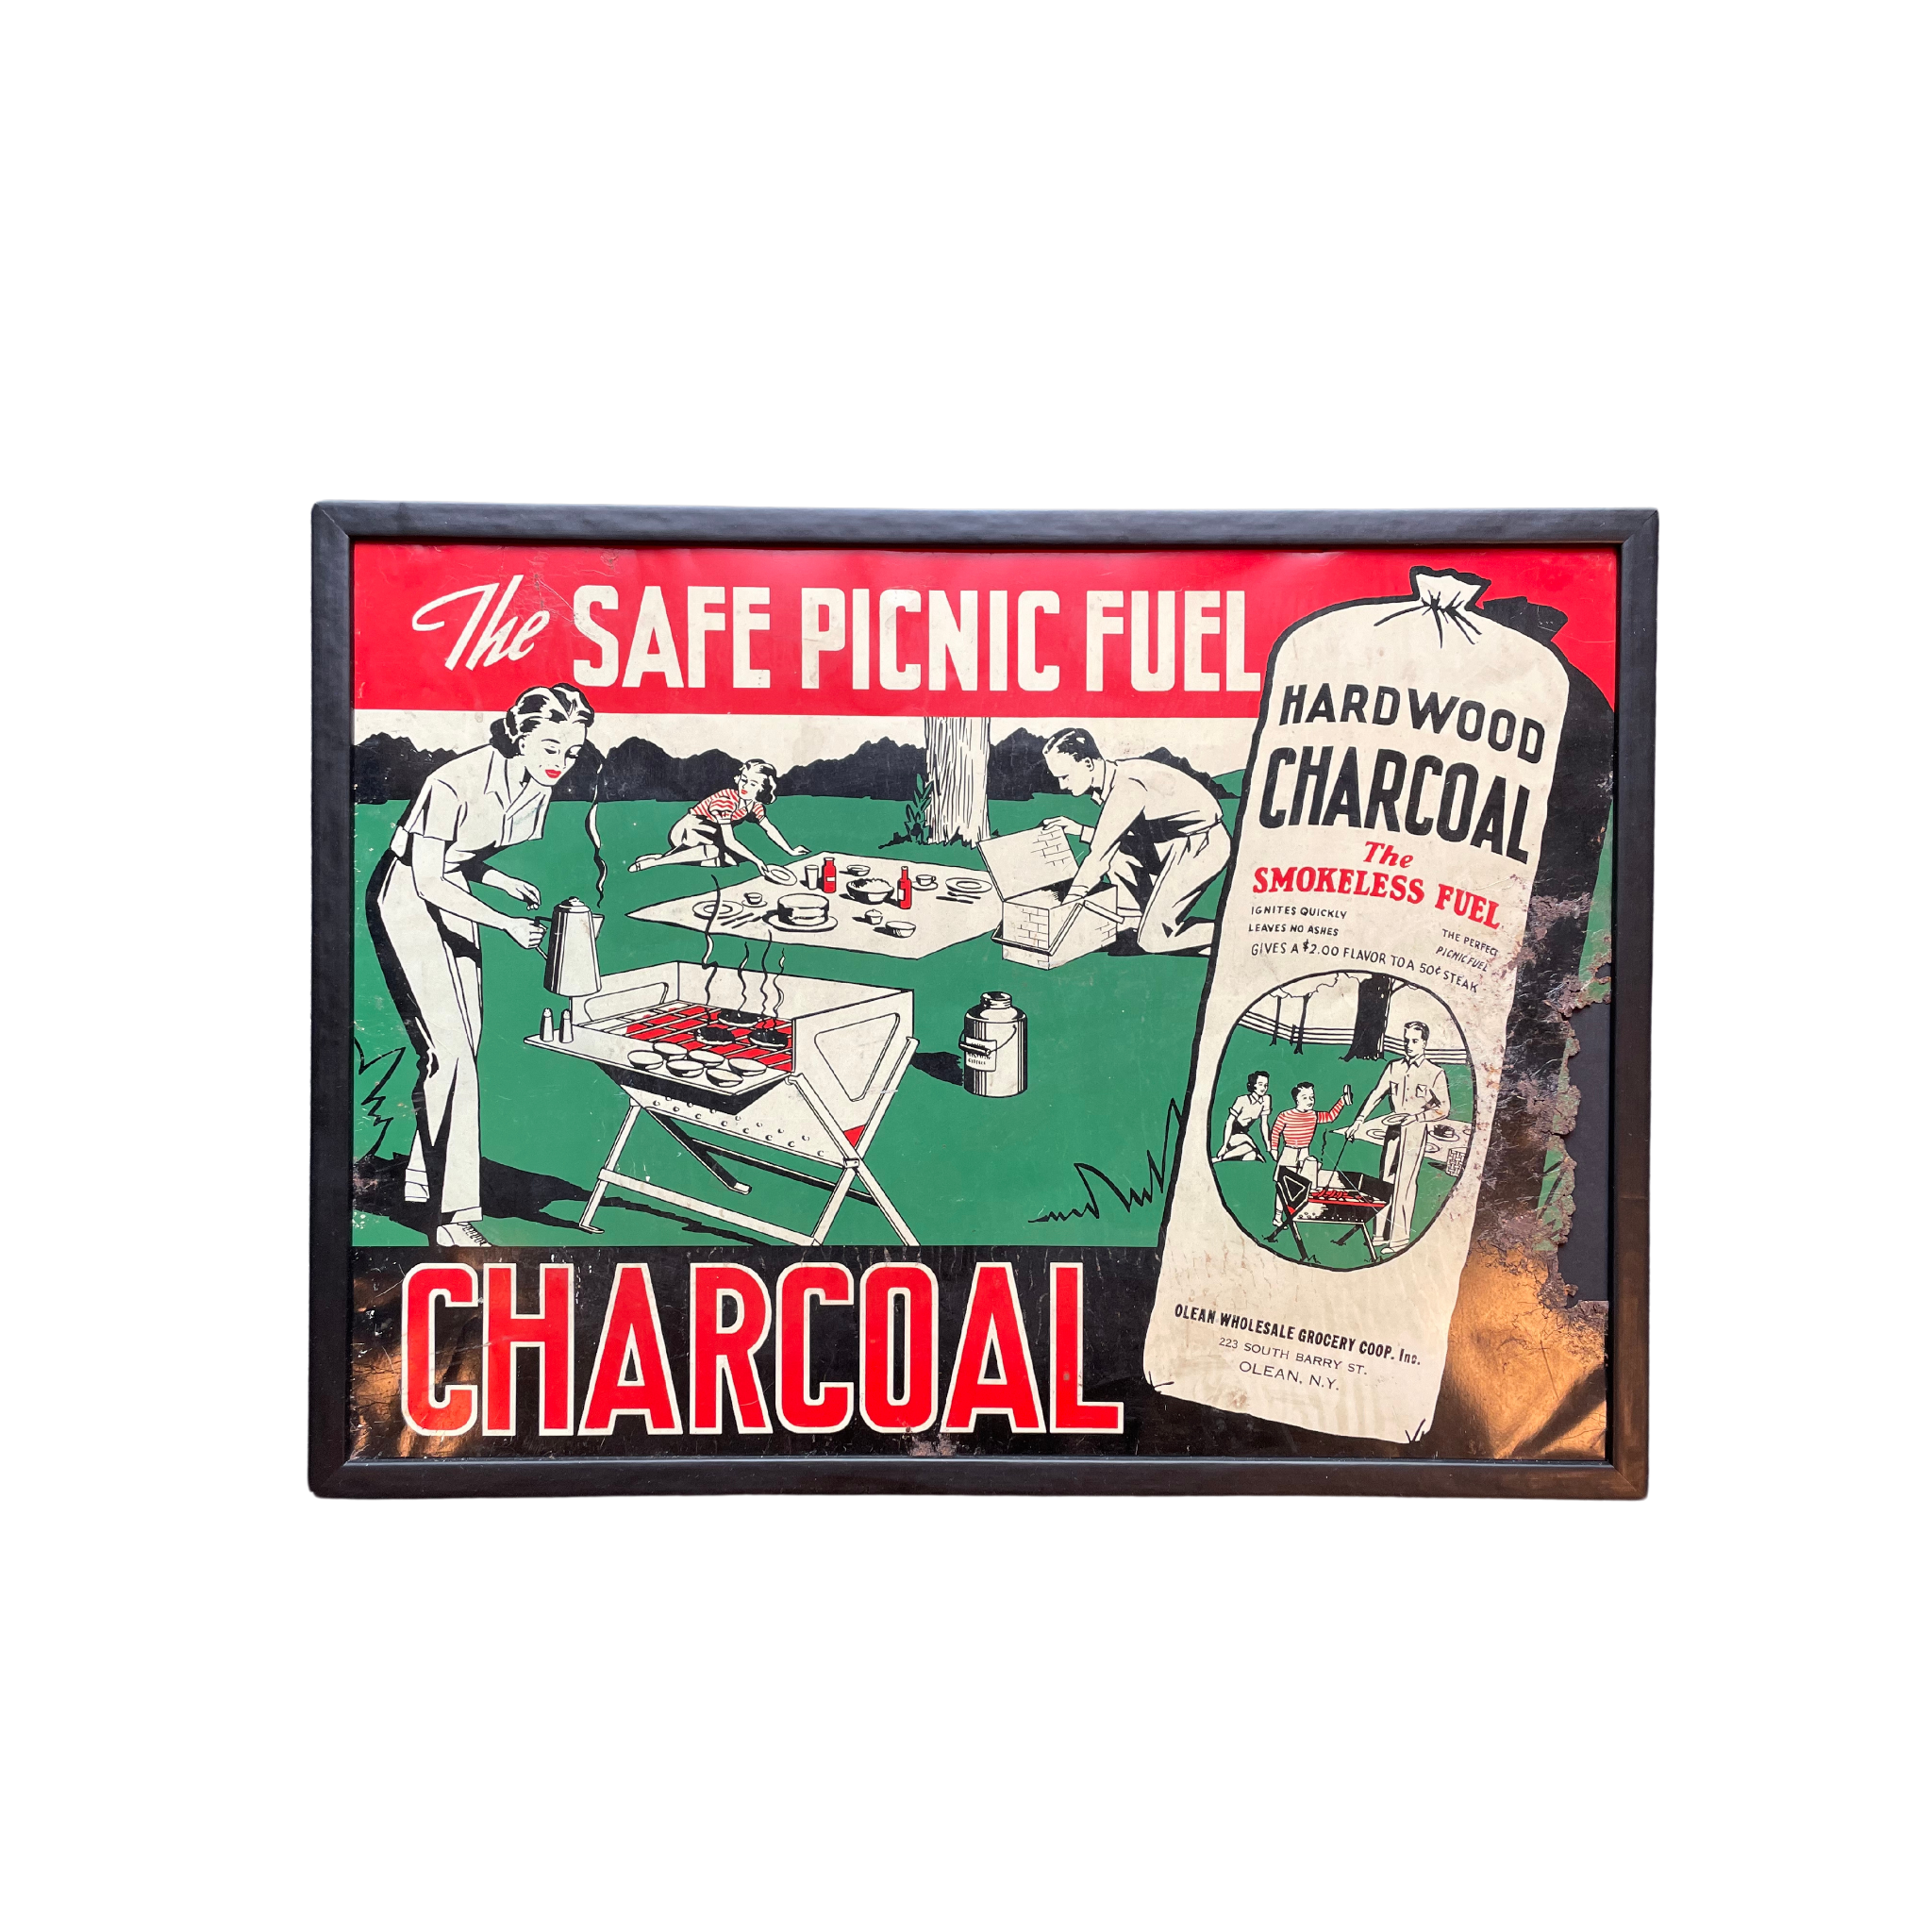 Charcoal; The Safe Picnic Fuel Sign